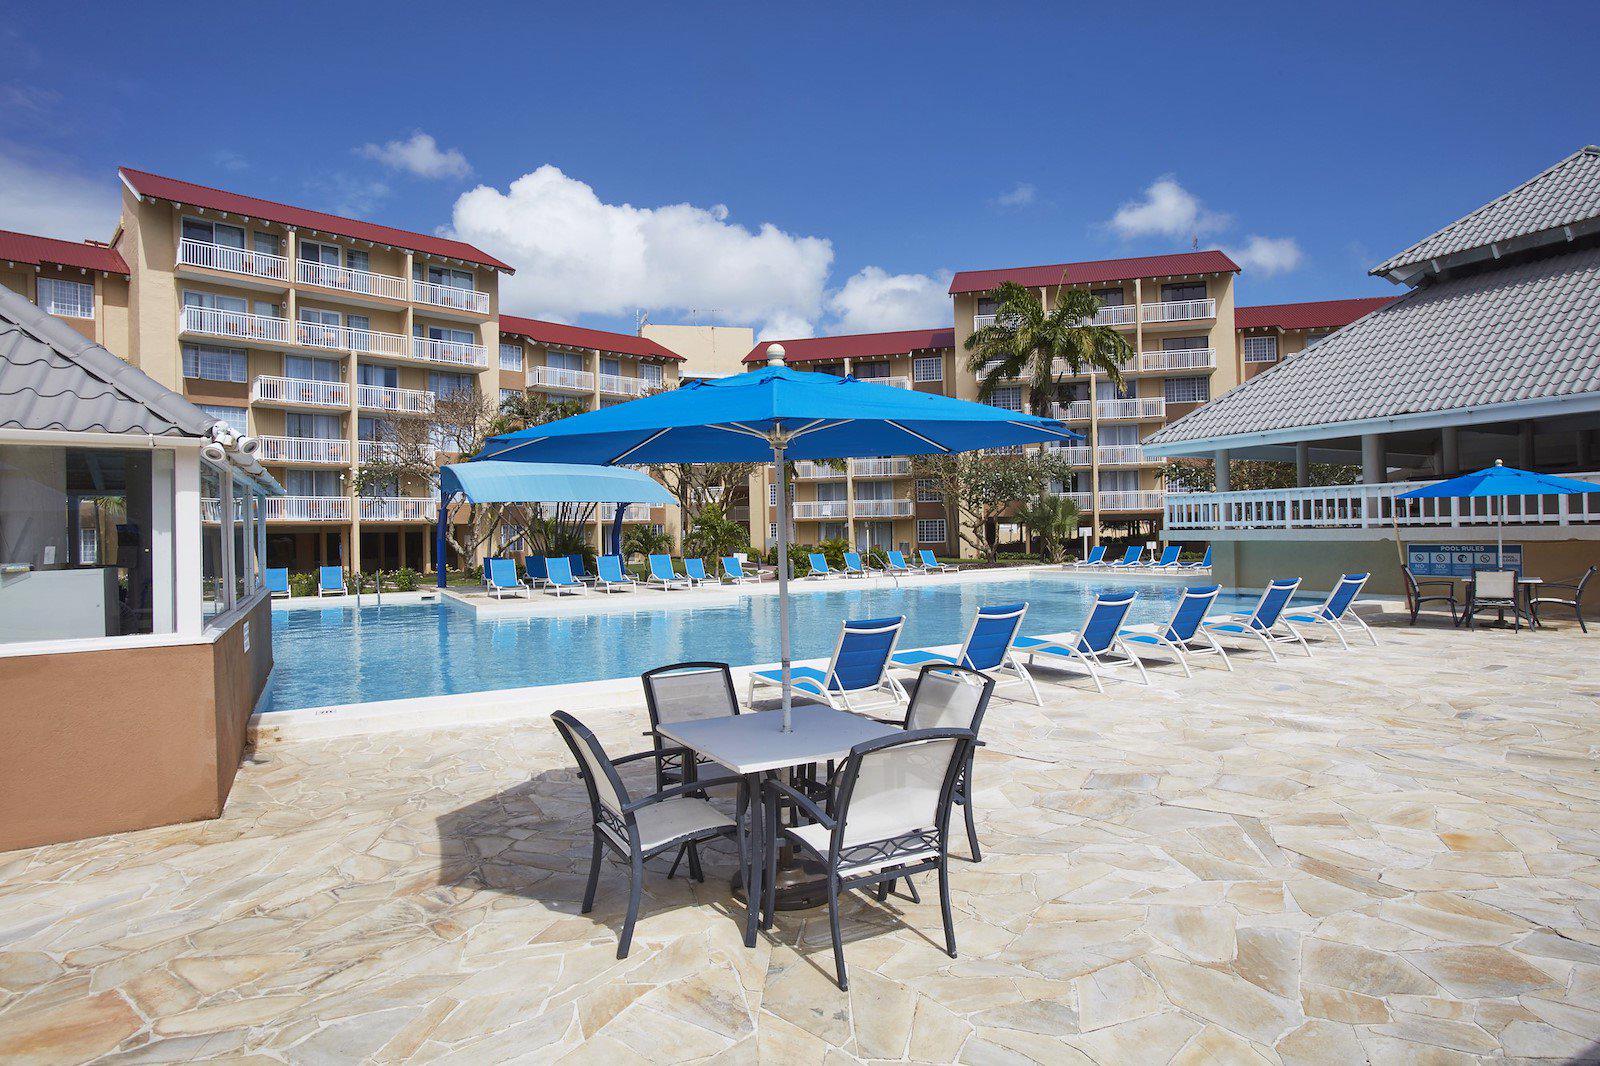 Divi Southwinds Beach Resort - St Lawrence - Barbados